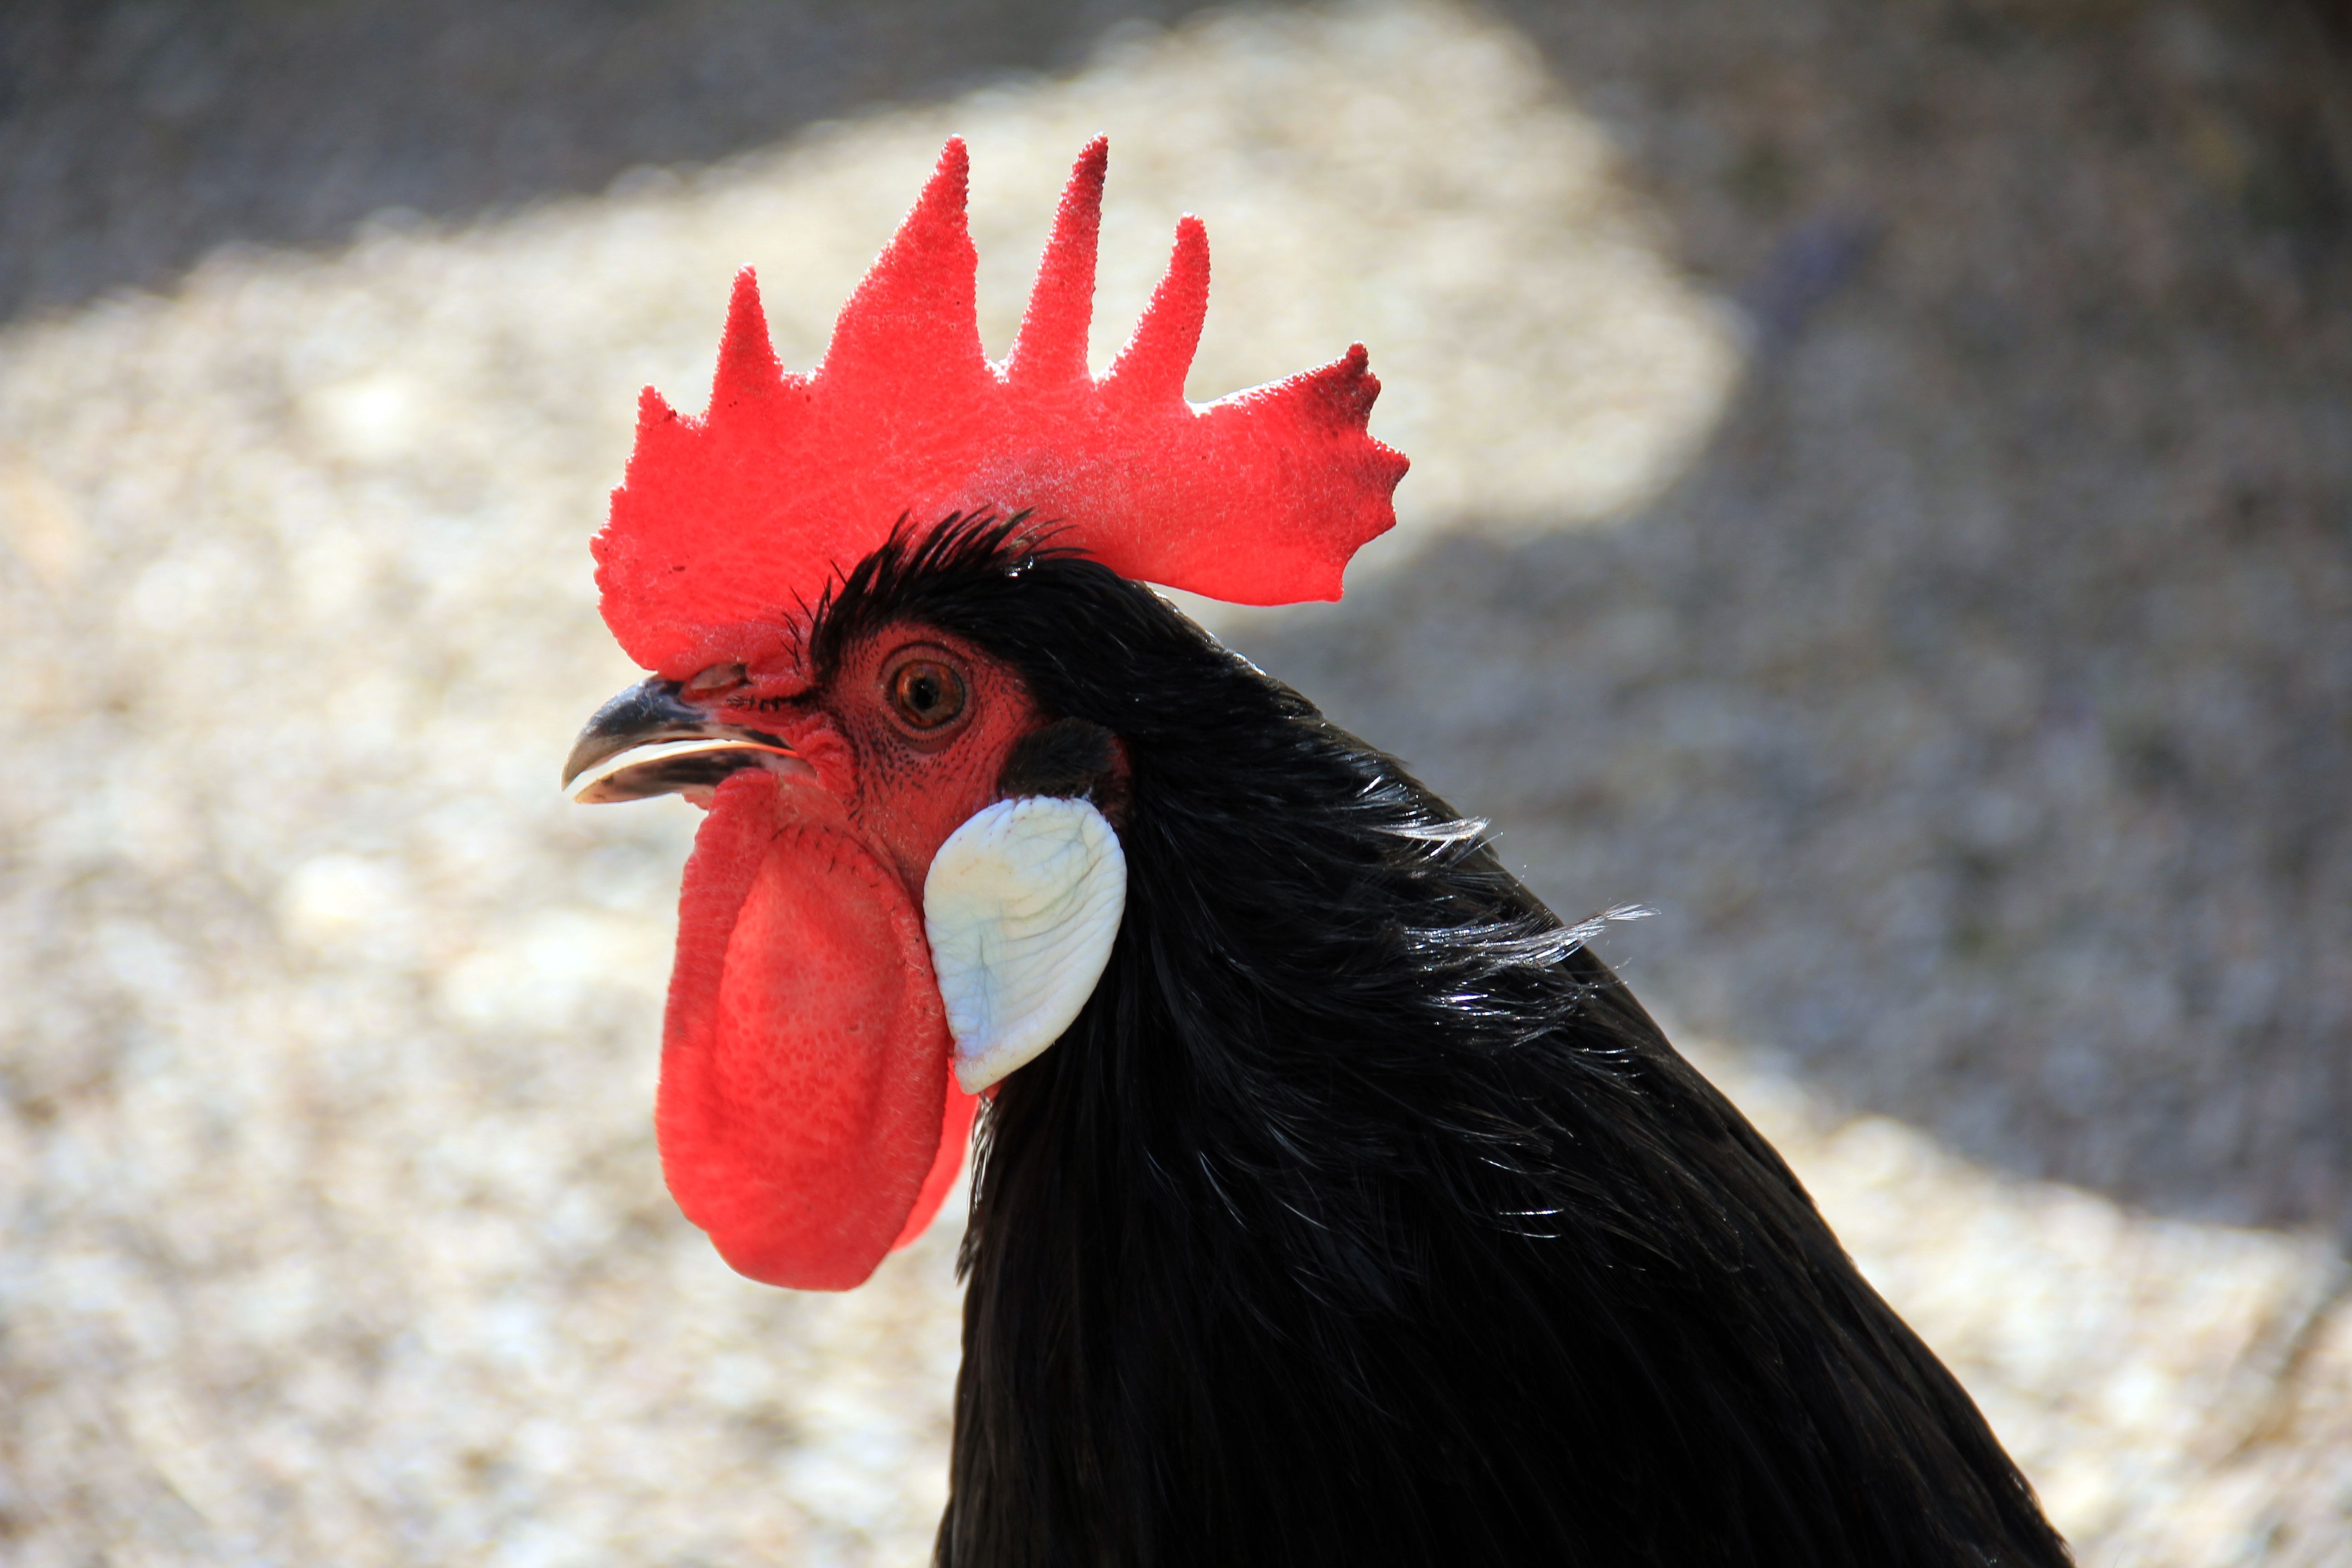 A black rooster with a red crest.